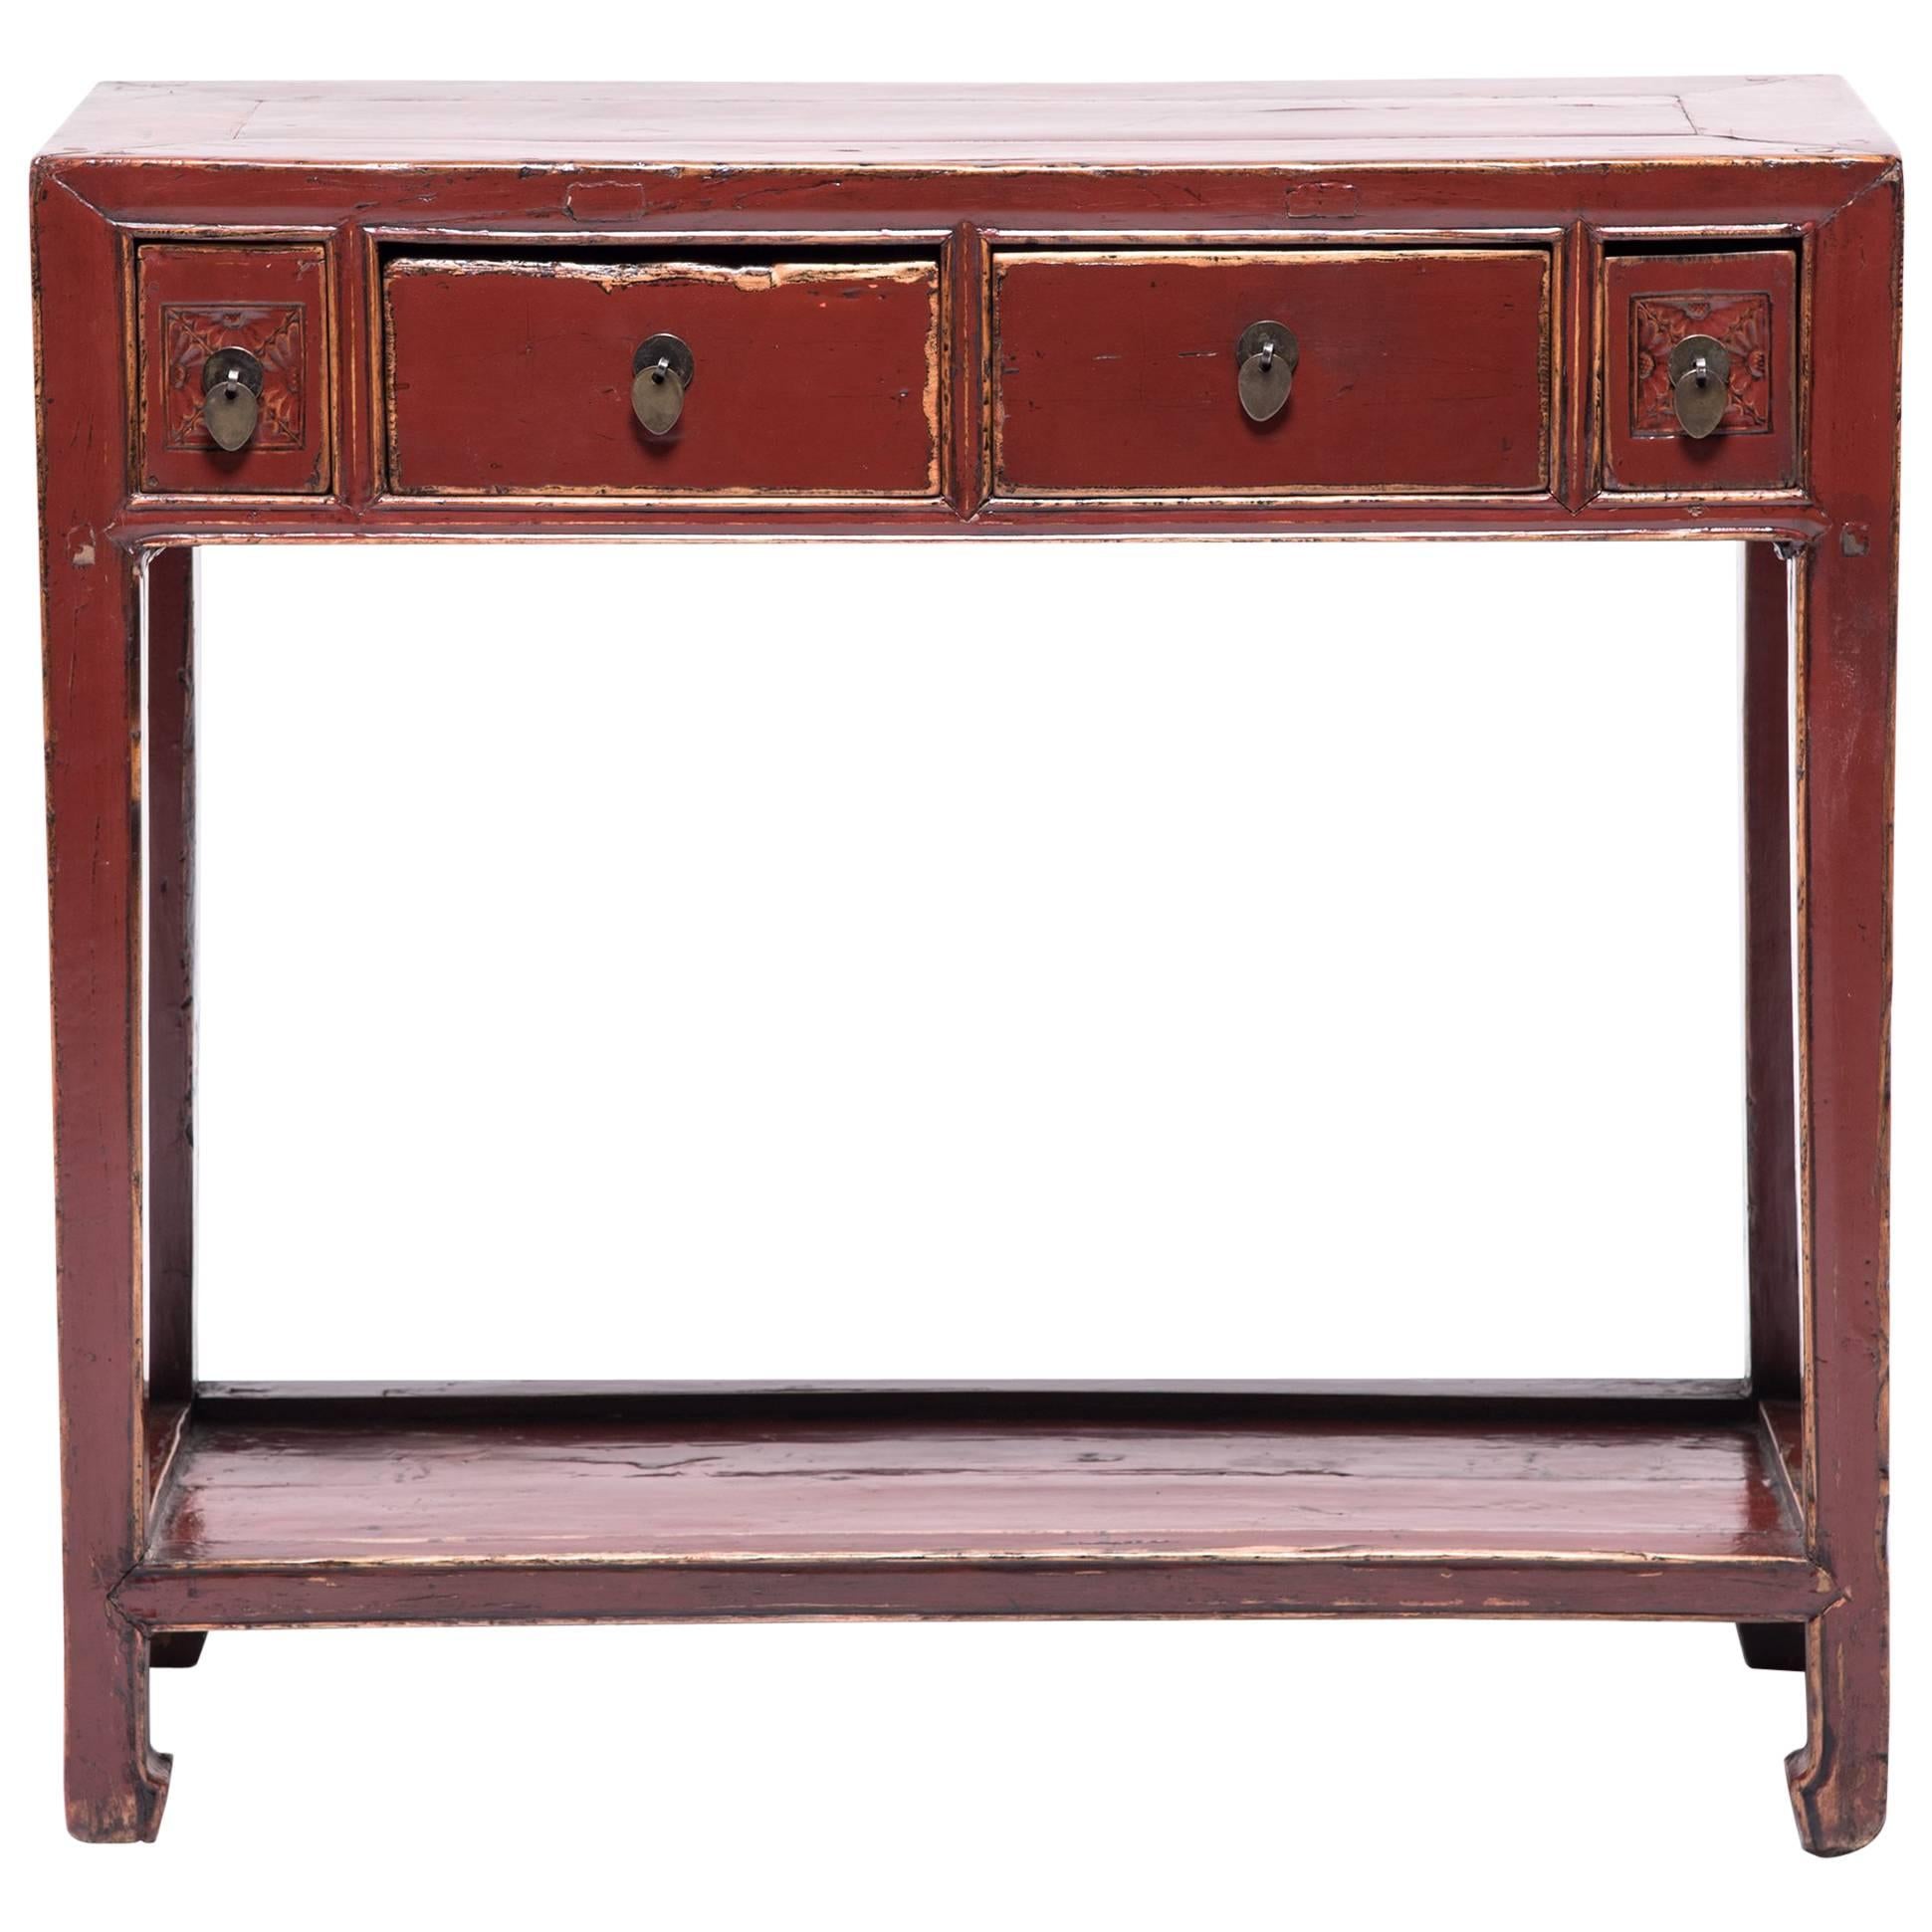 Four-Drawer Chinese Red Lacquer Table with Shelf